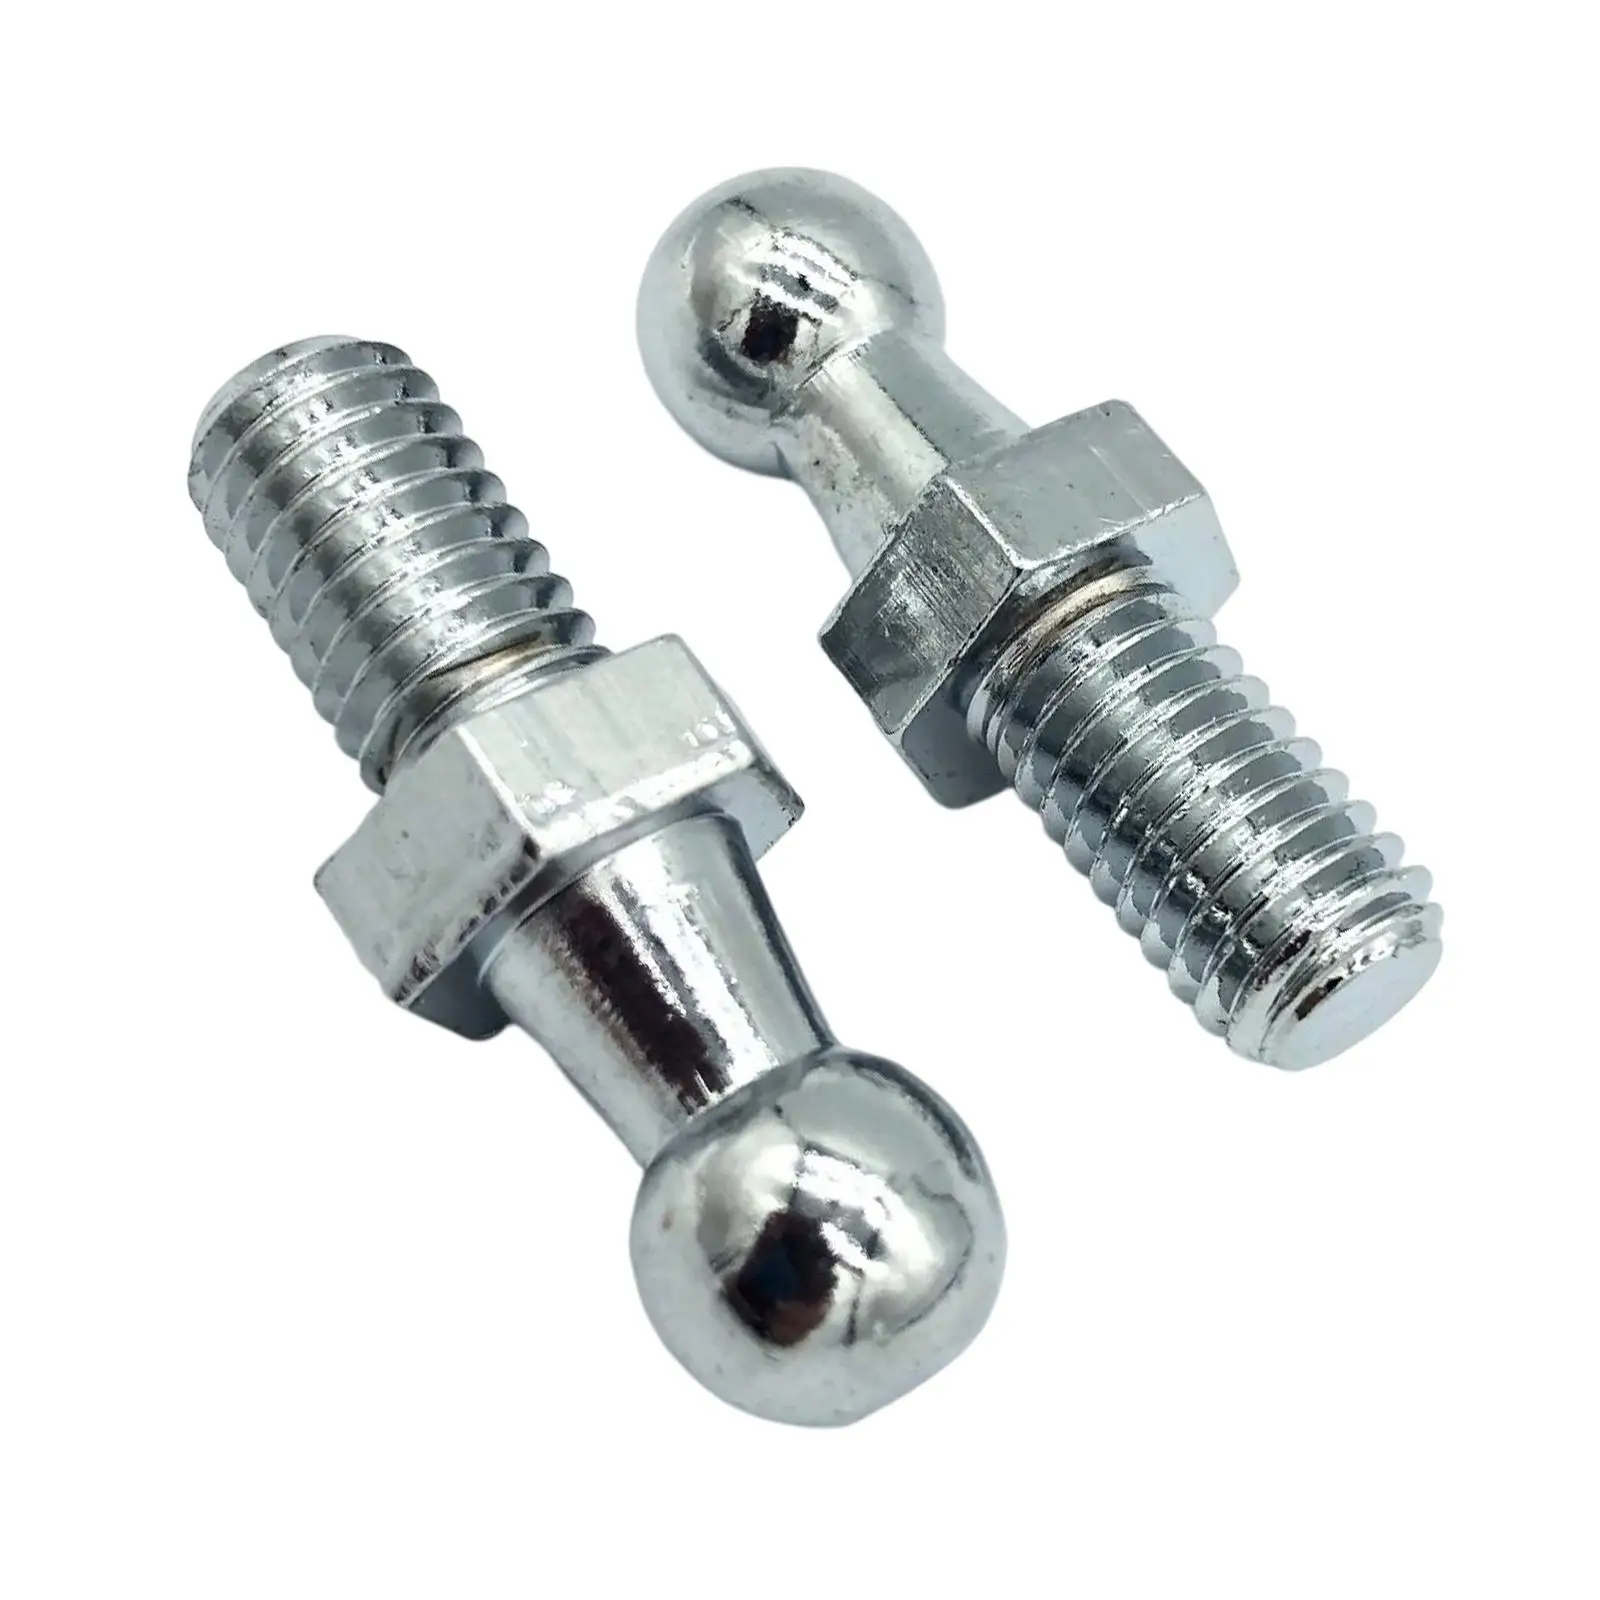 2x Ball Stud Pin Bolt ,Replaces Easy to Install Accessory, Gas Strut End Fittings, 10mm Durable M8 M6 Universal